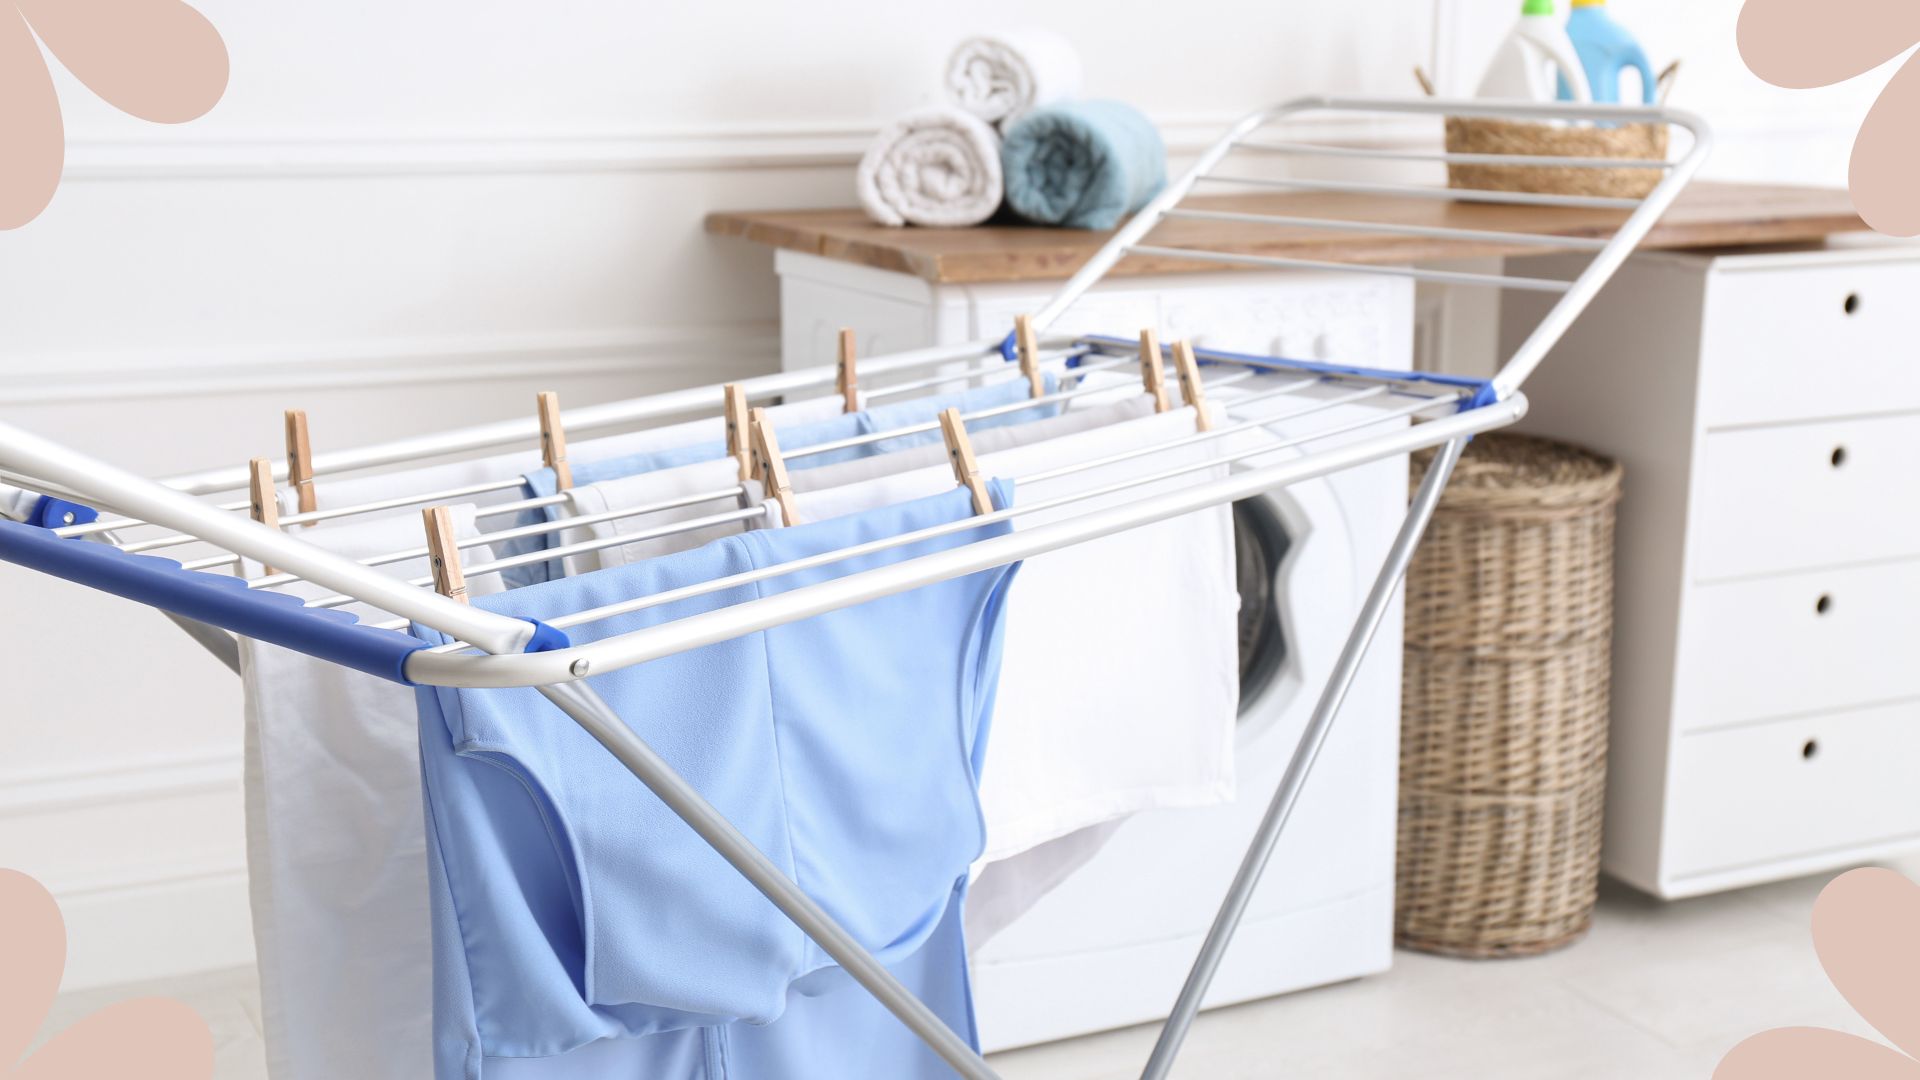 How to Dry Clothes Fast? Top Tips for Speedy Laundry Drying!